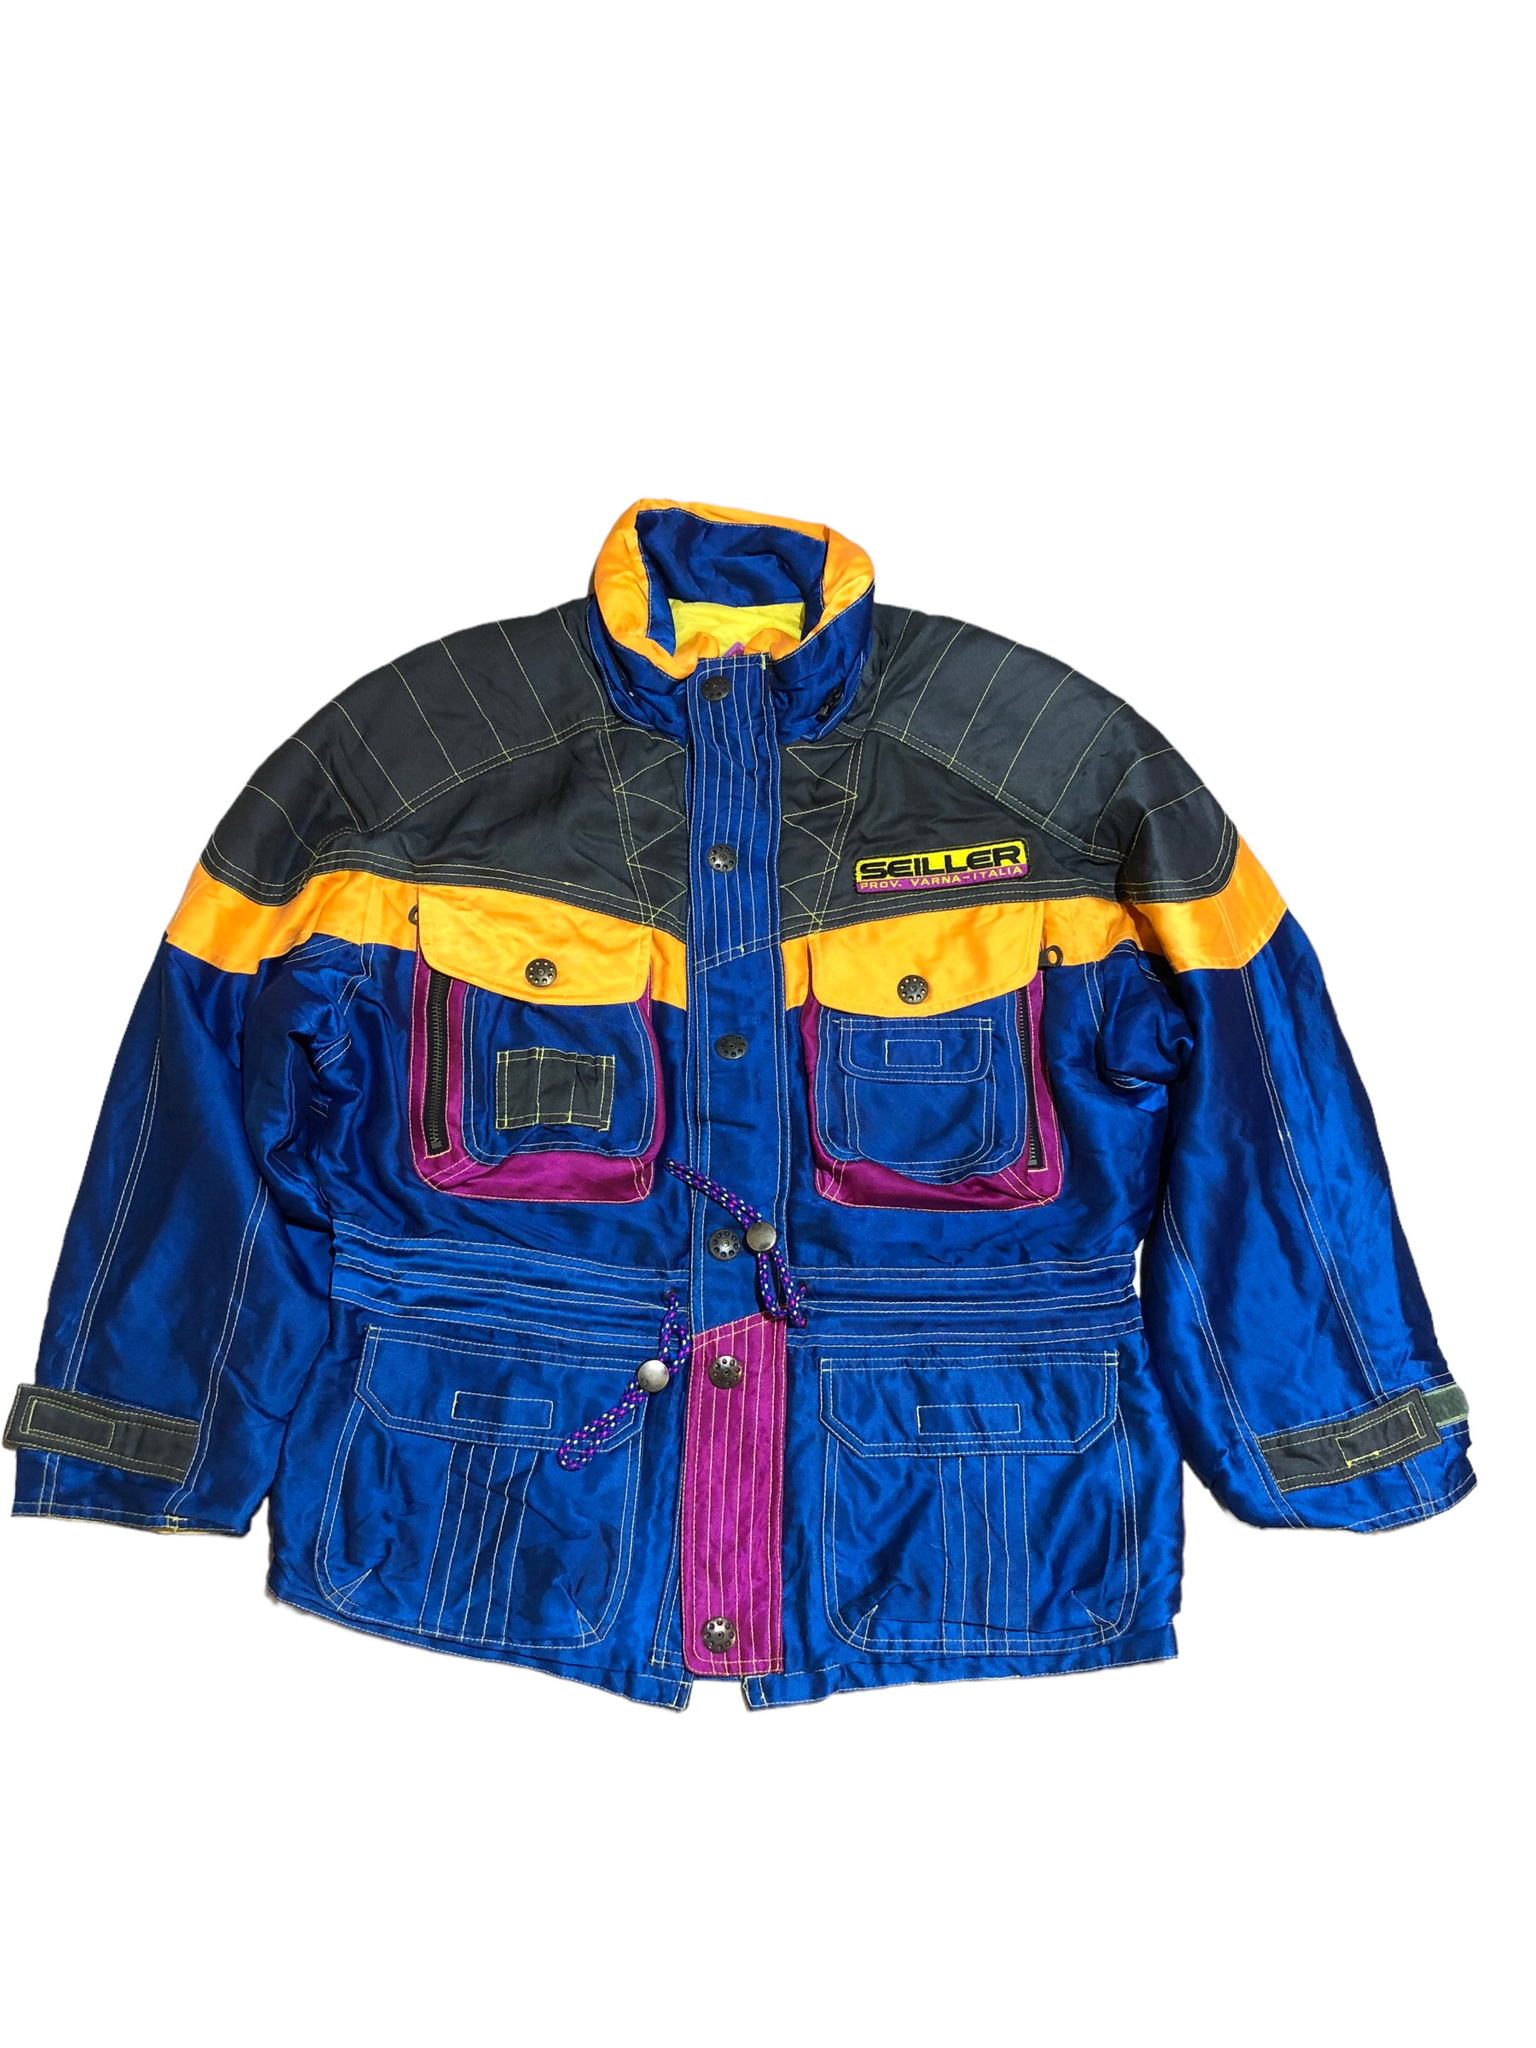 Seillor 90s Color Block Jacket from Japan